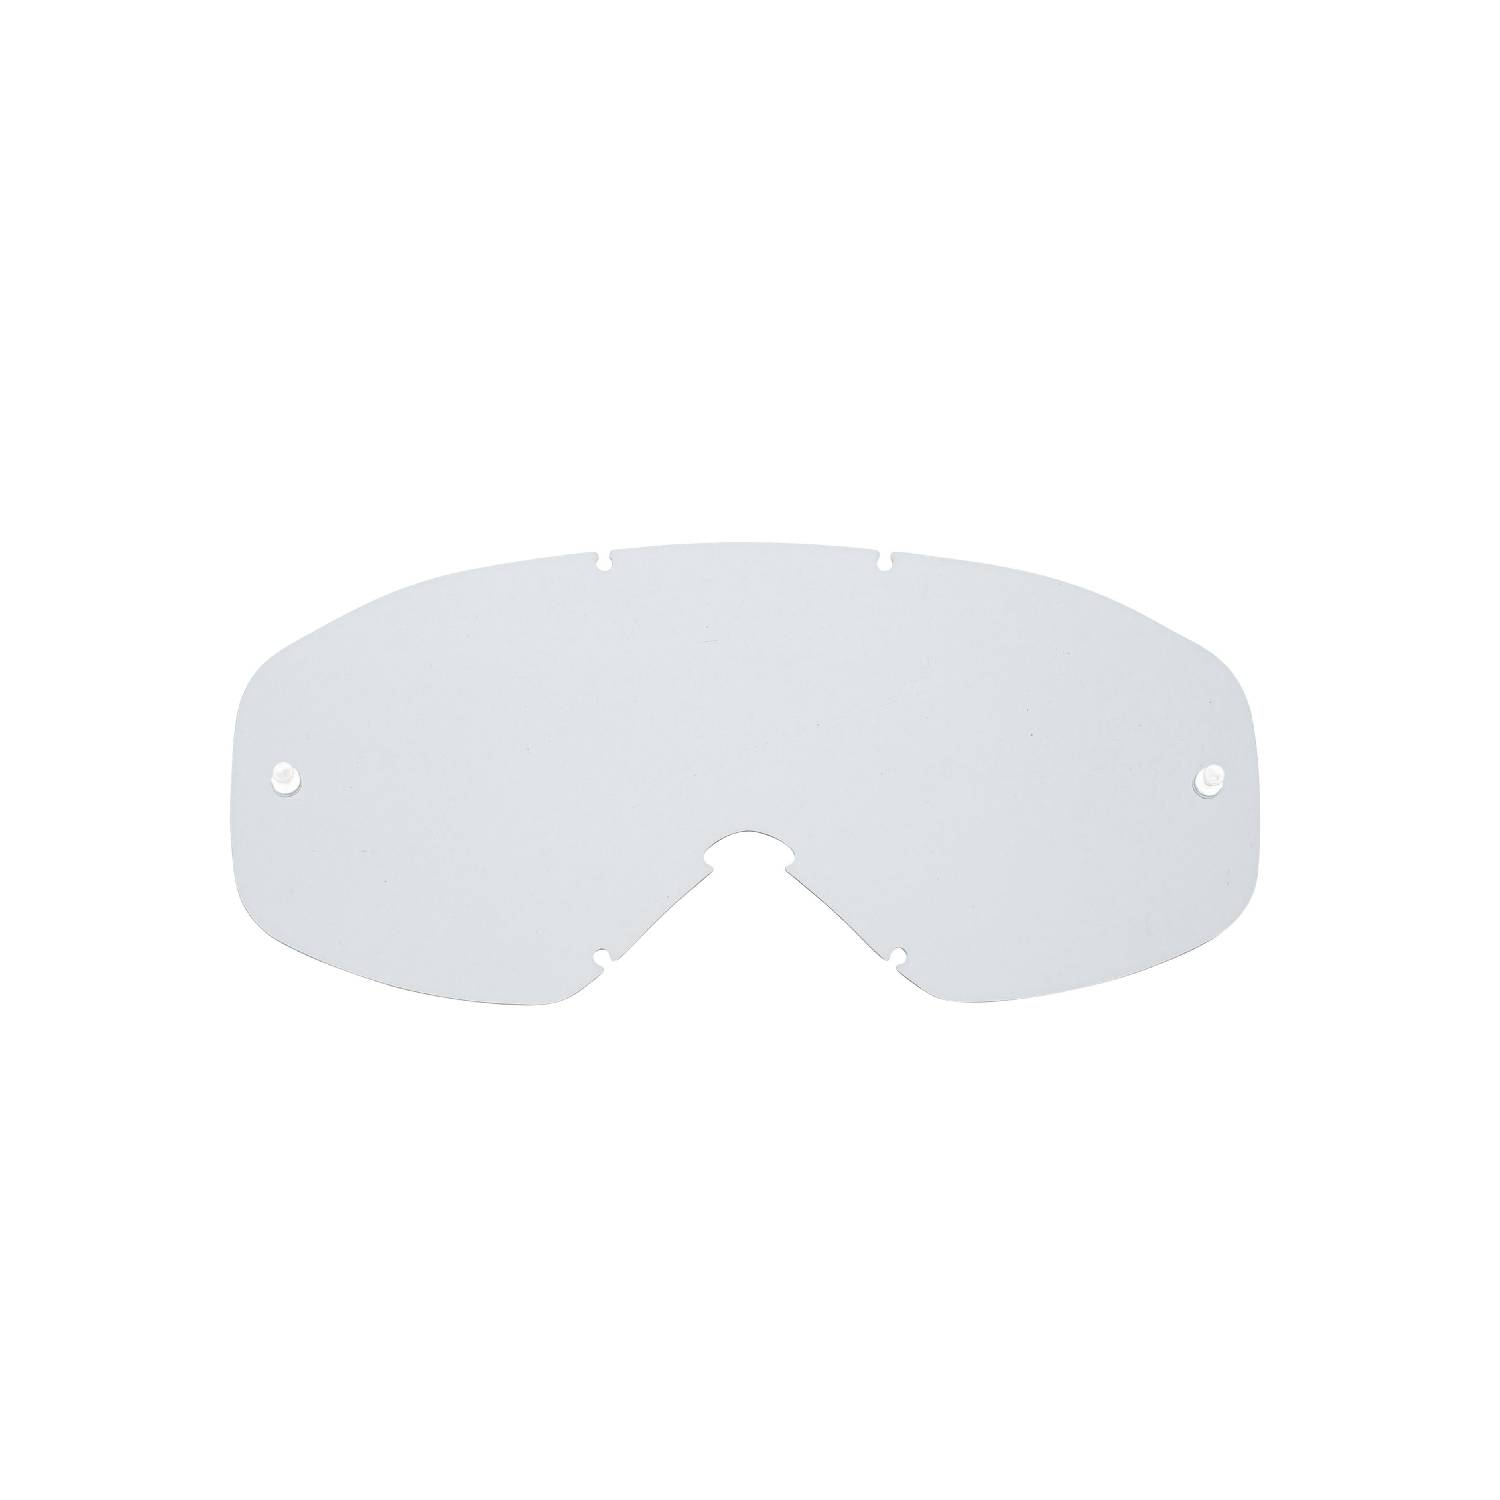 clear replacement lenses for goggles compatible for Oakley Proven goggle